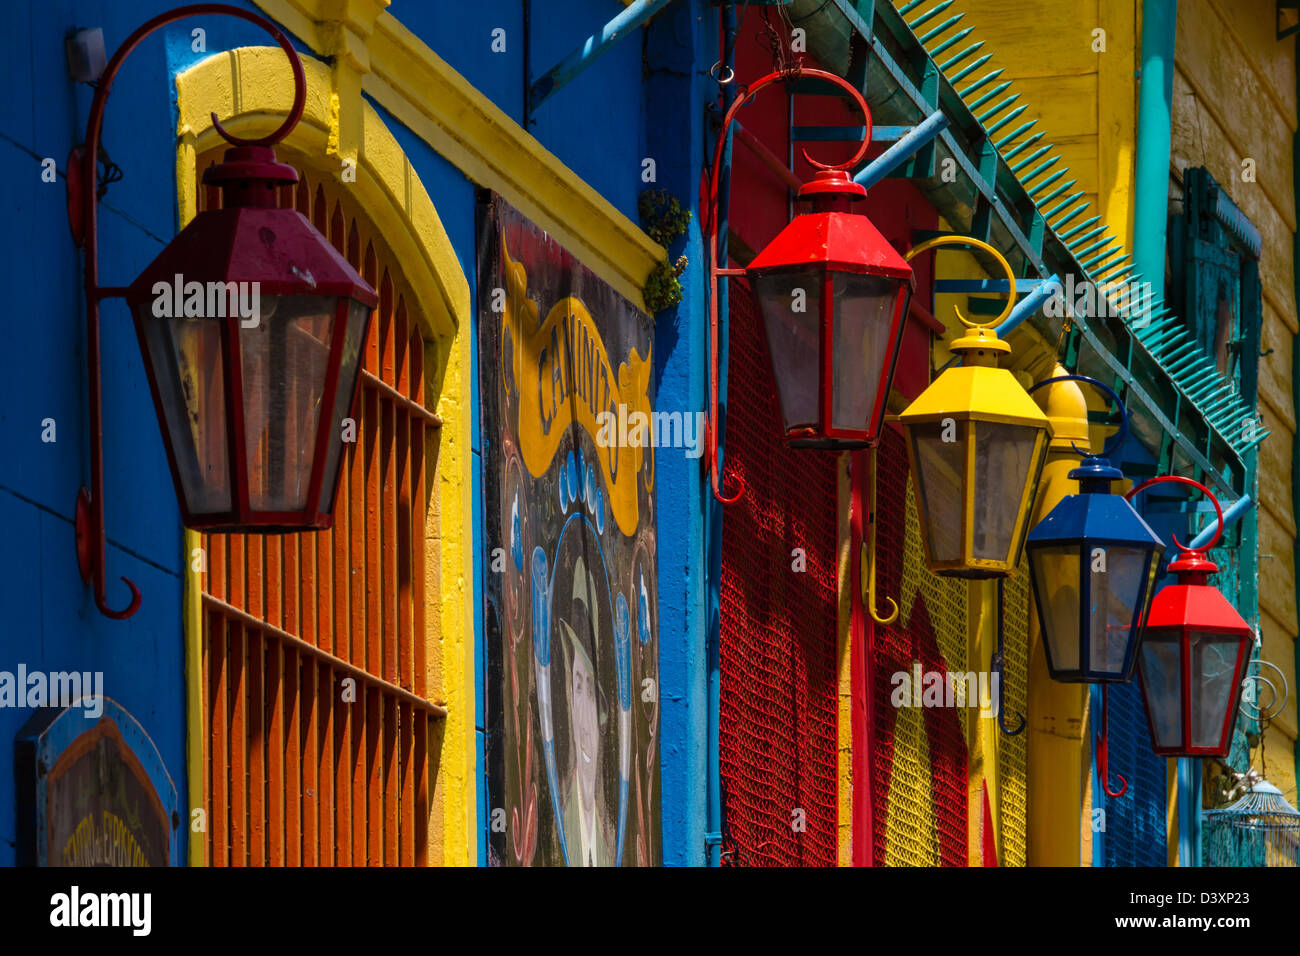 Colourful street lights and vividly painted walls in bright La Boca, Buenos Aires, Argentina Stock Photo